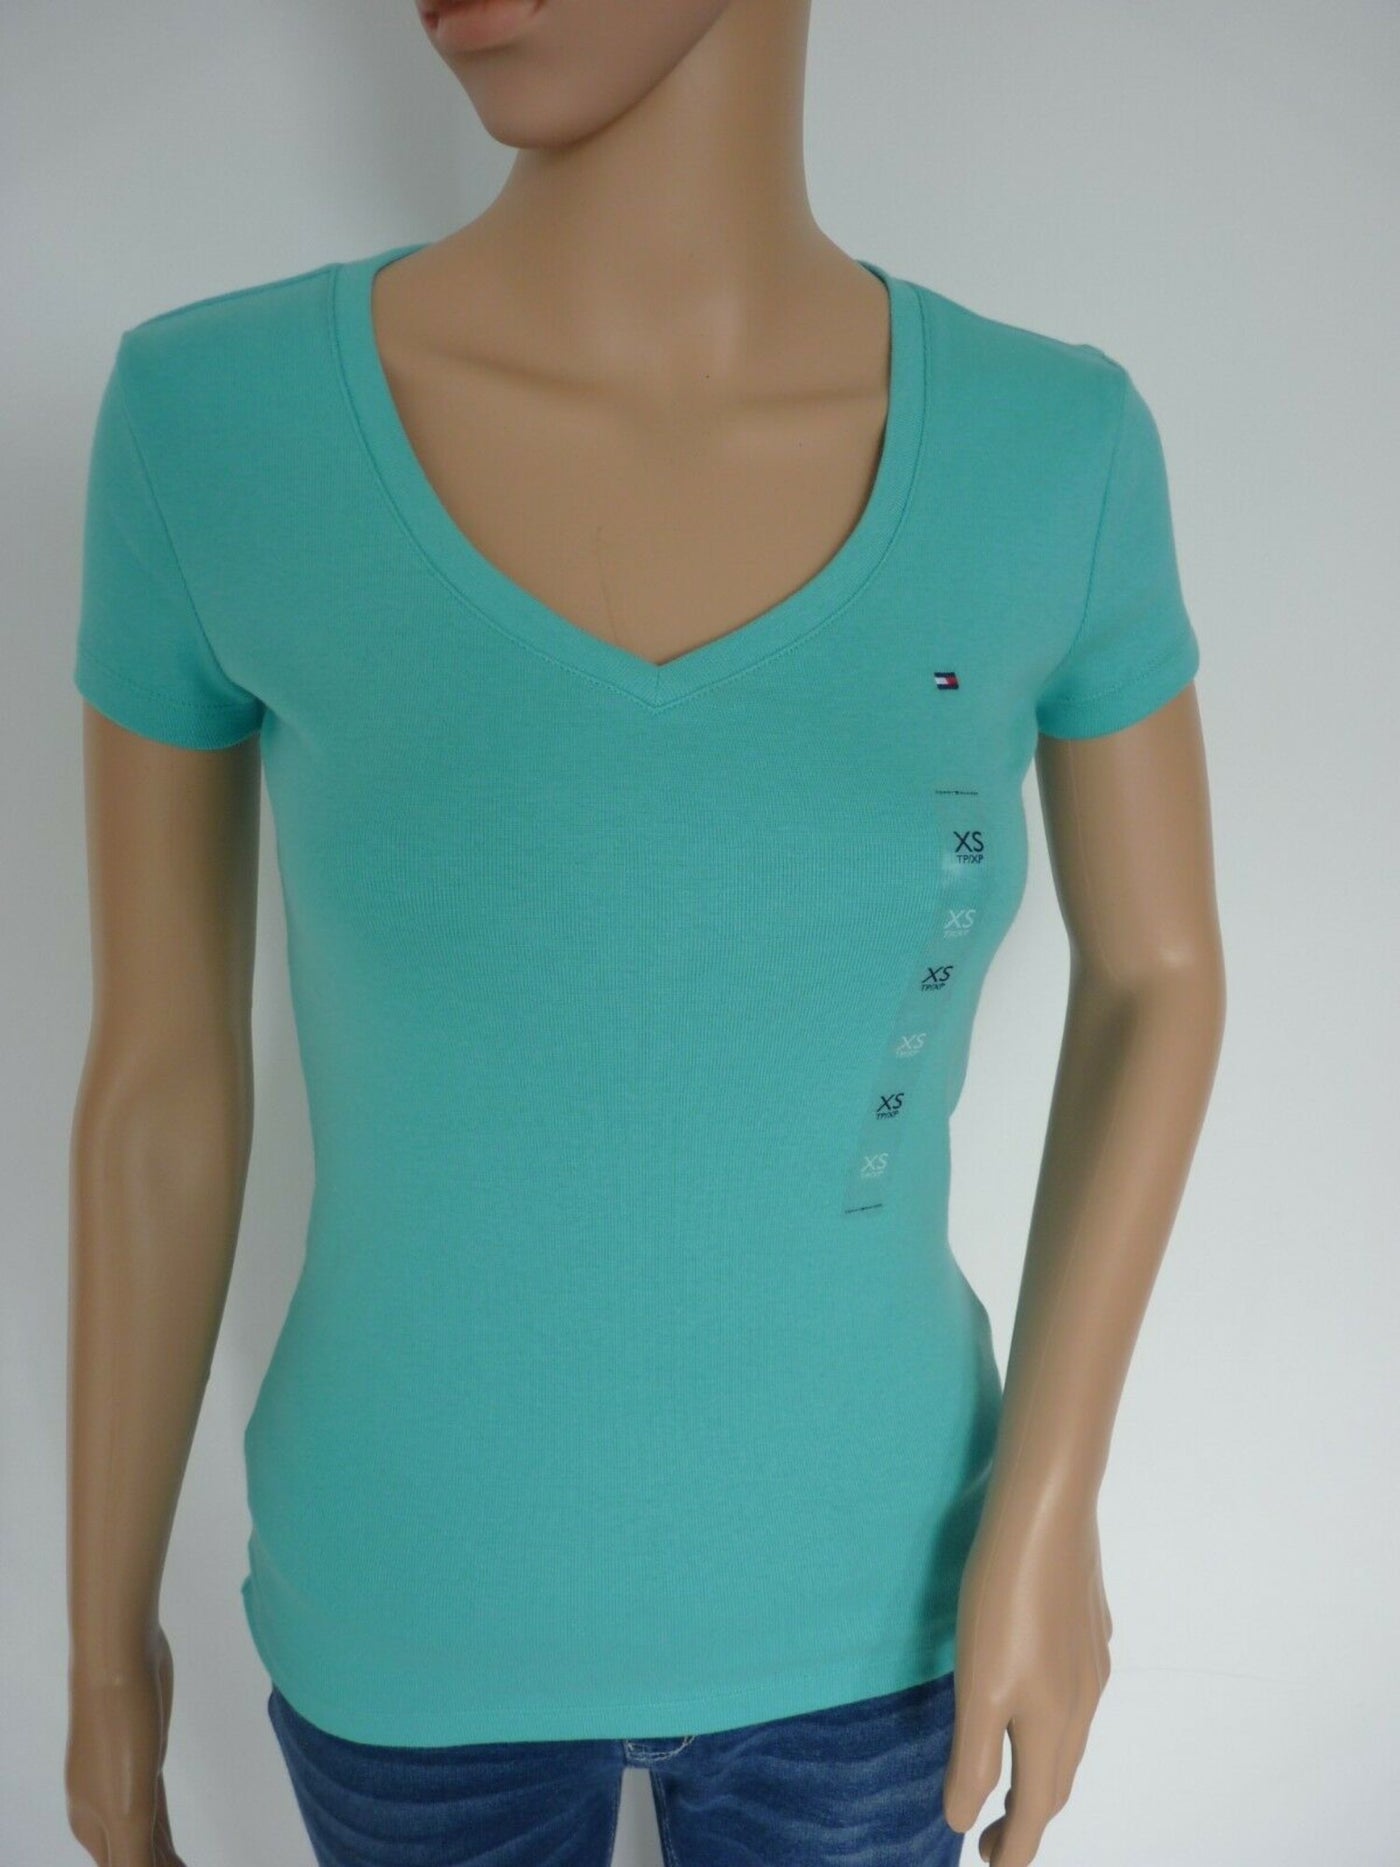 TOMMY HILFIGER Womens Turquoise Embroidered Short Sleeve V Neck T-Shirt XS